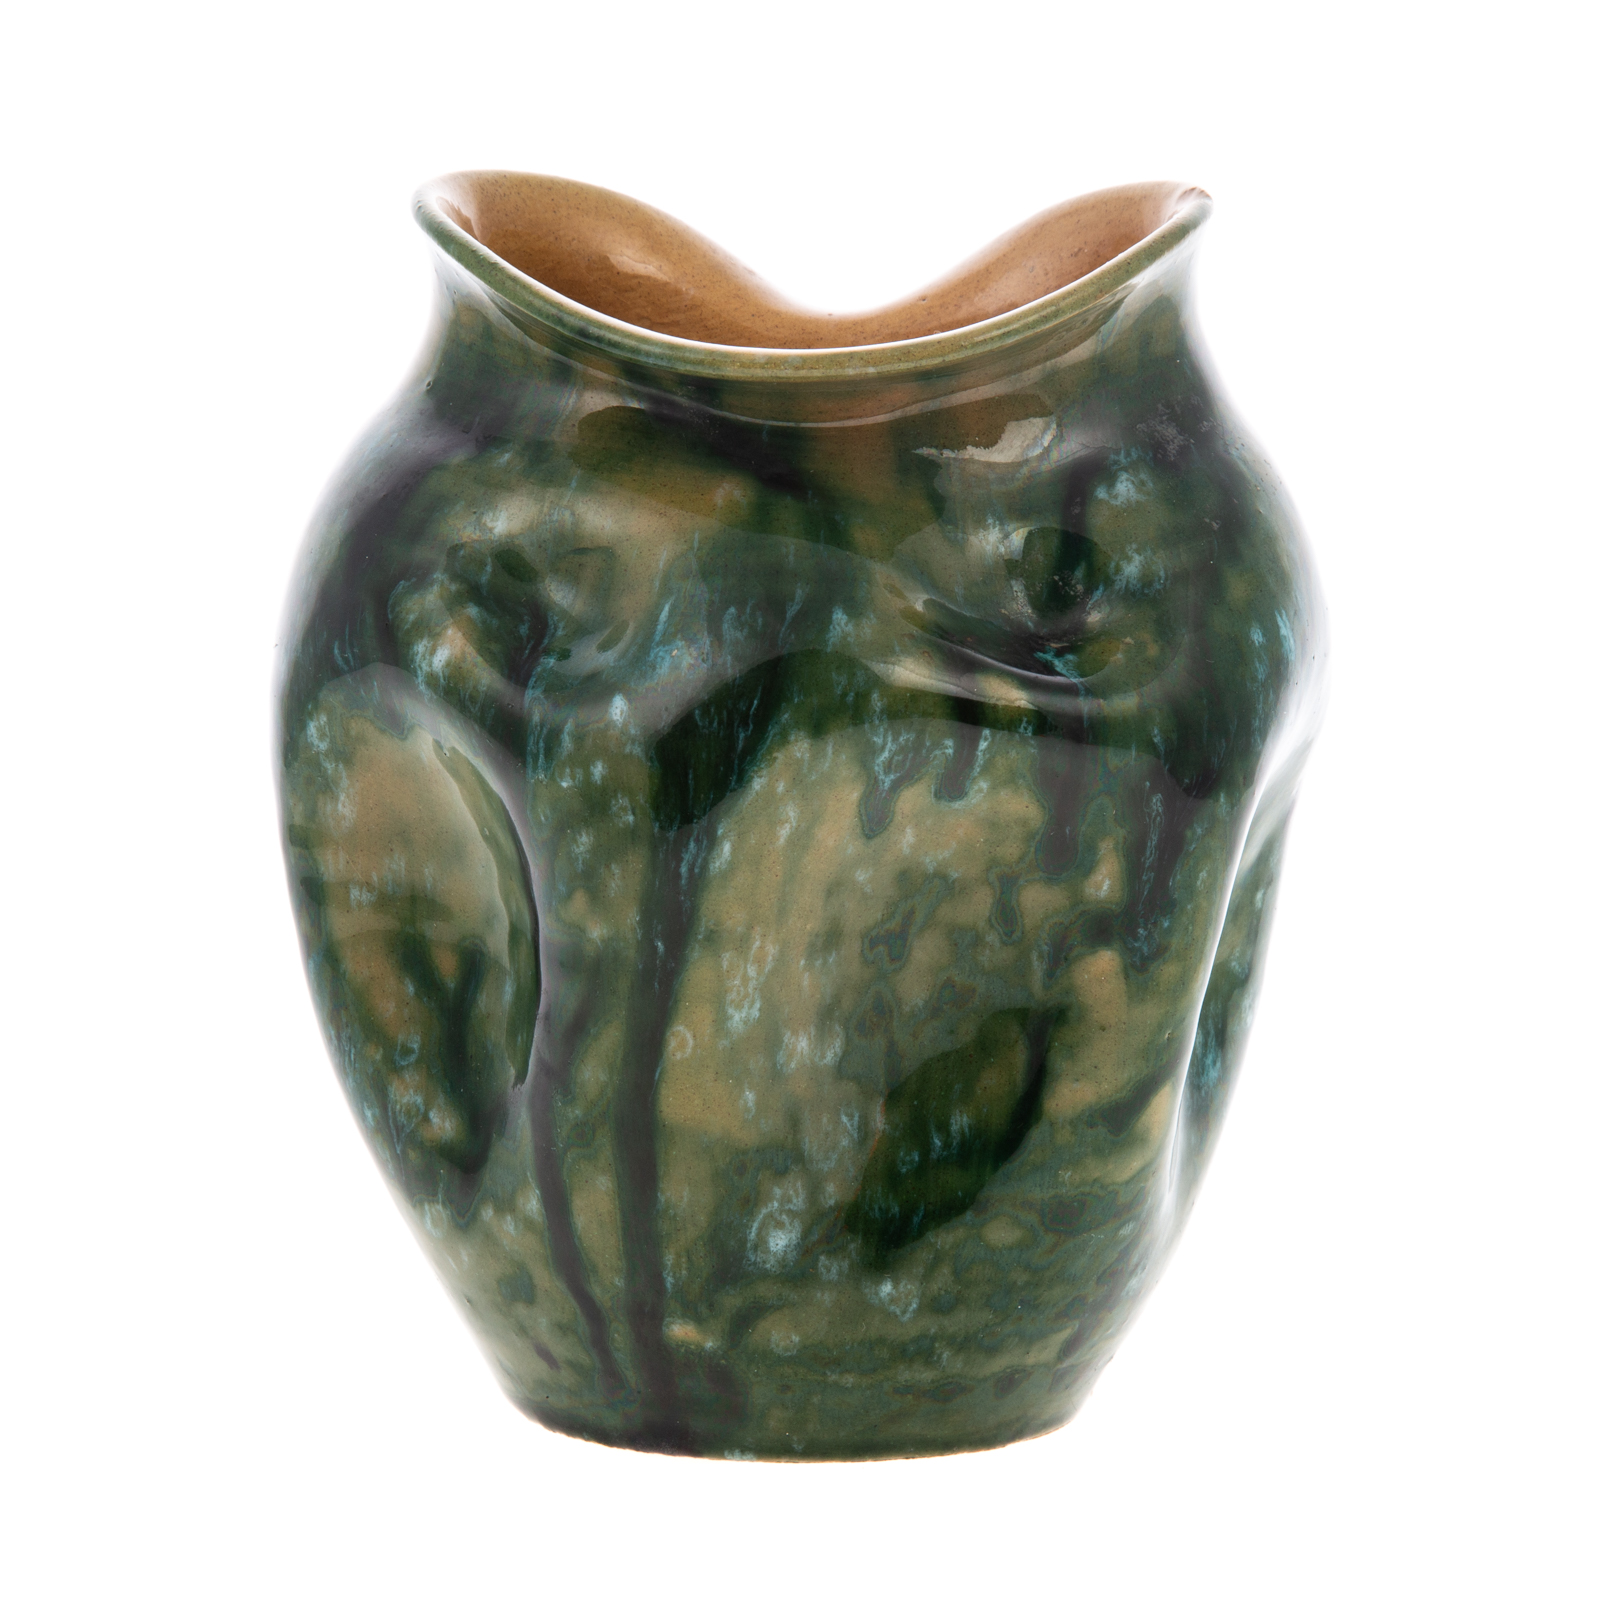 GEORGE OHR POTTERY VASE American  2e91bc